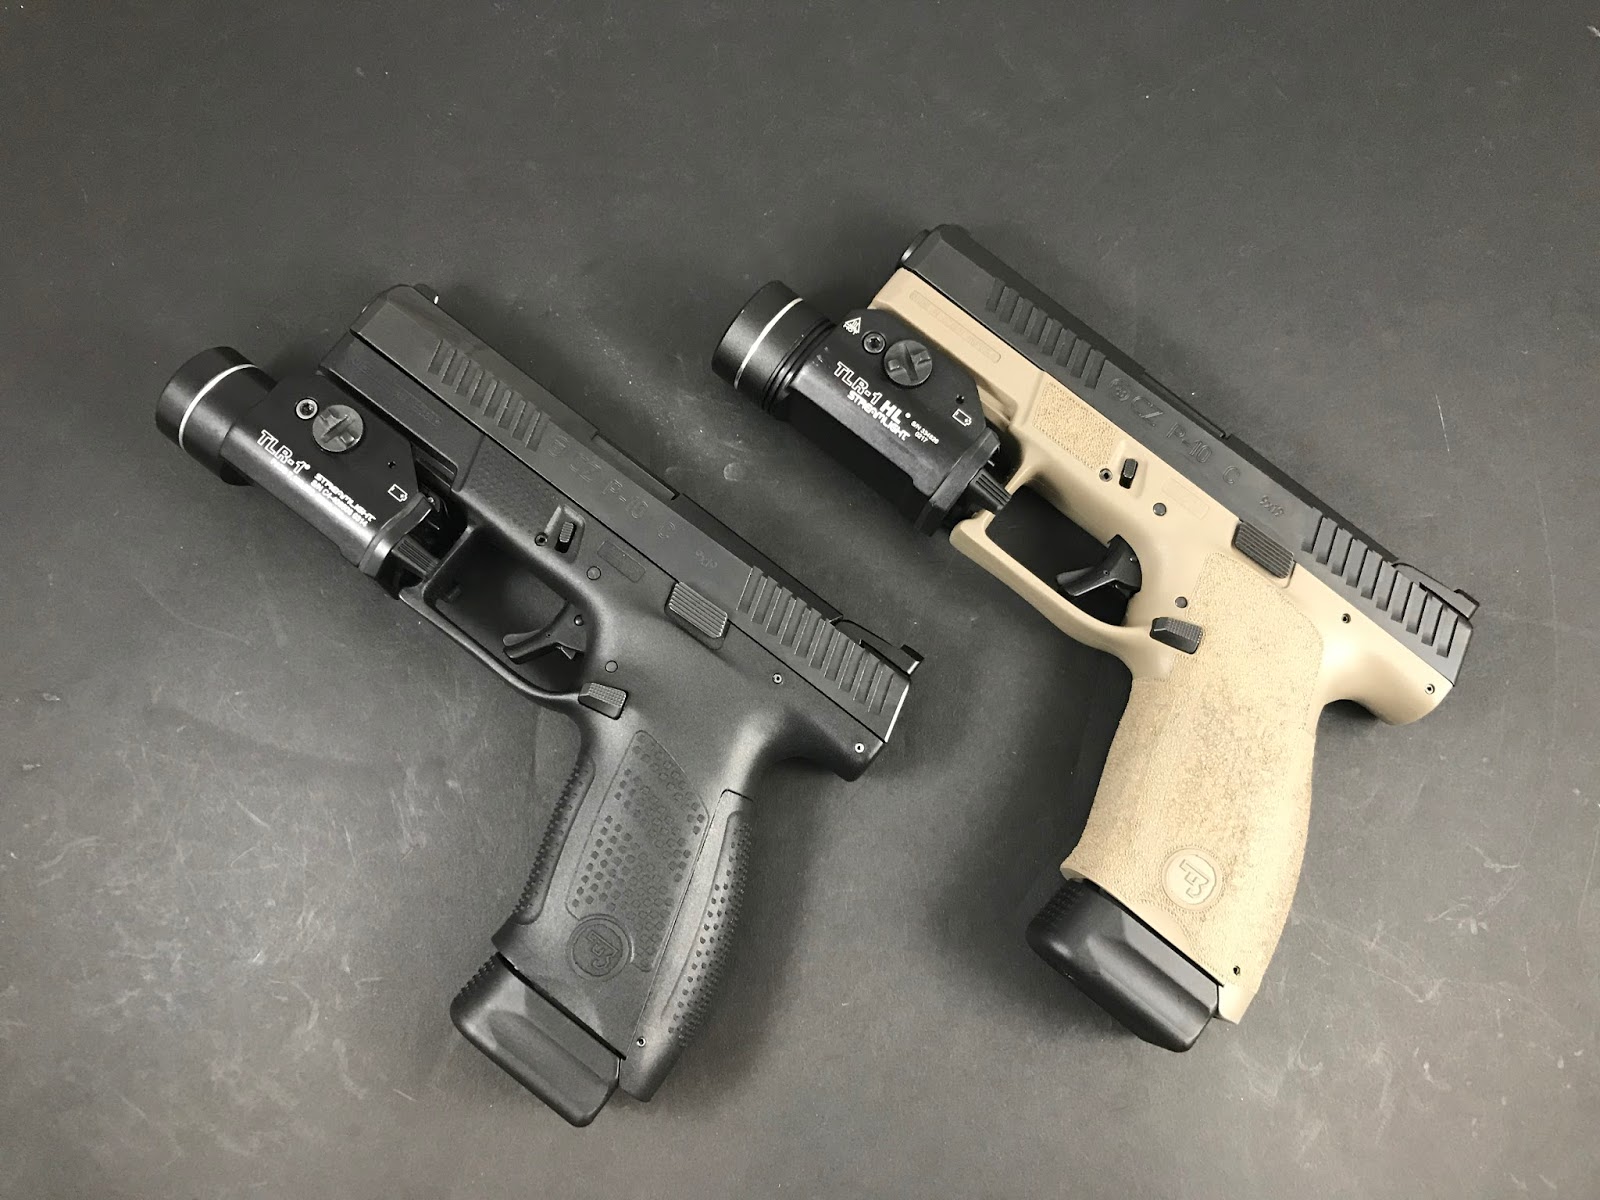 CZ P-10C - 1200 & 400 rounds, stippling and modification testing. 